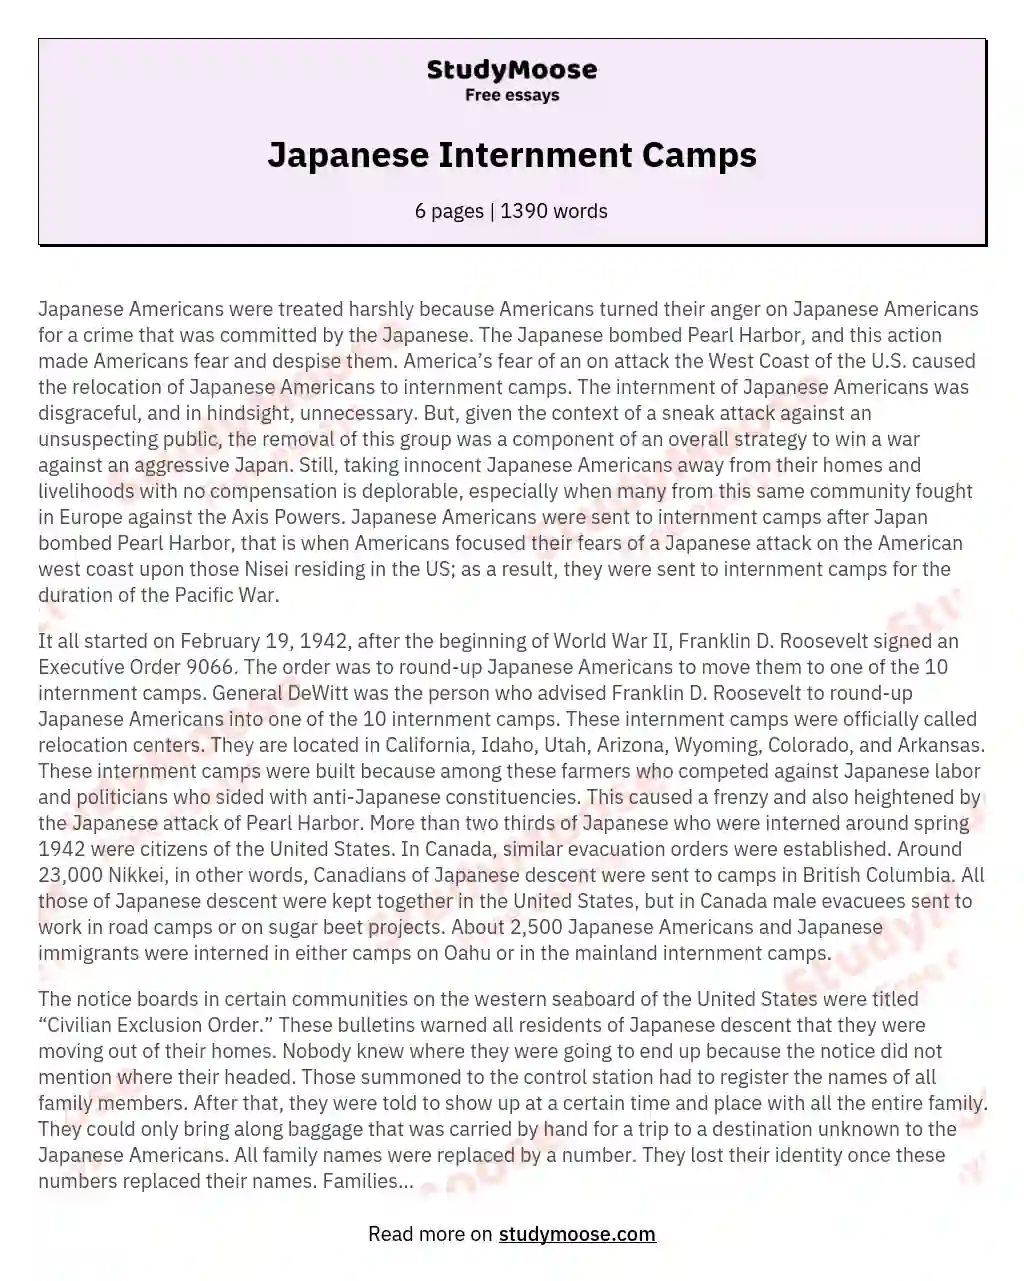 Japanese Internment Camps